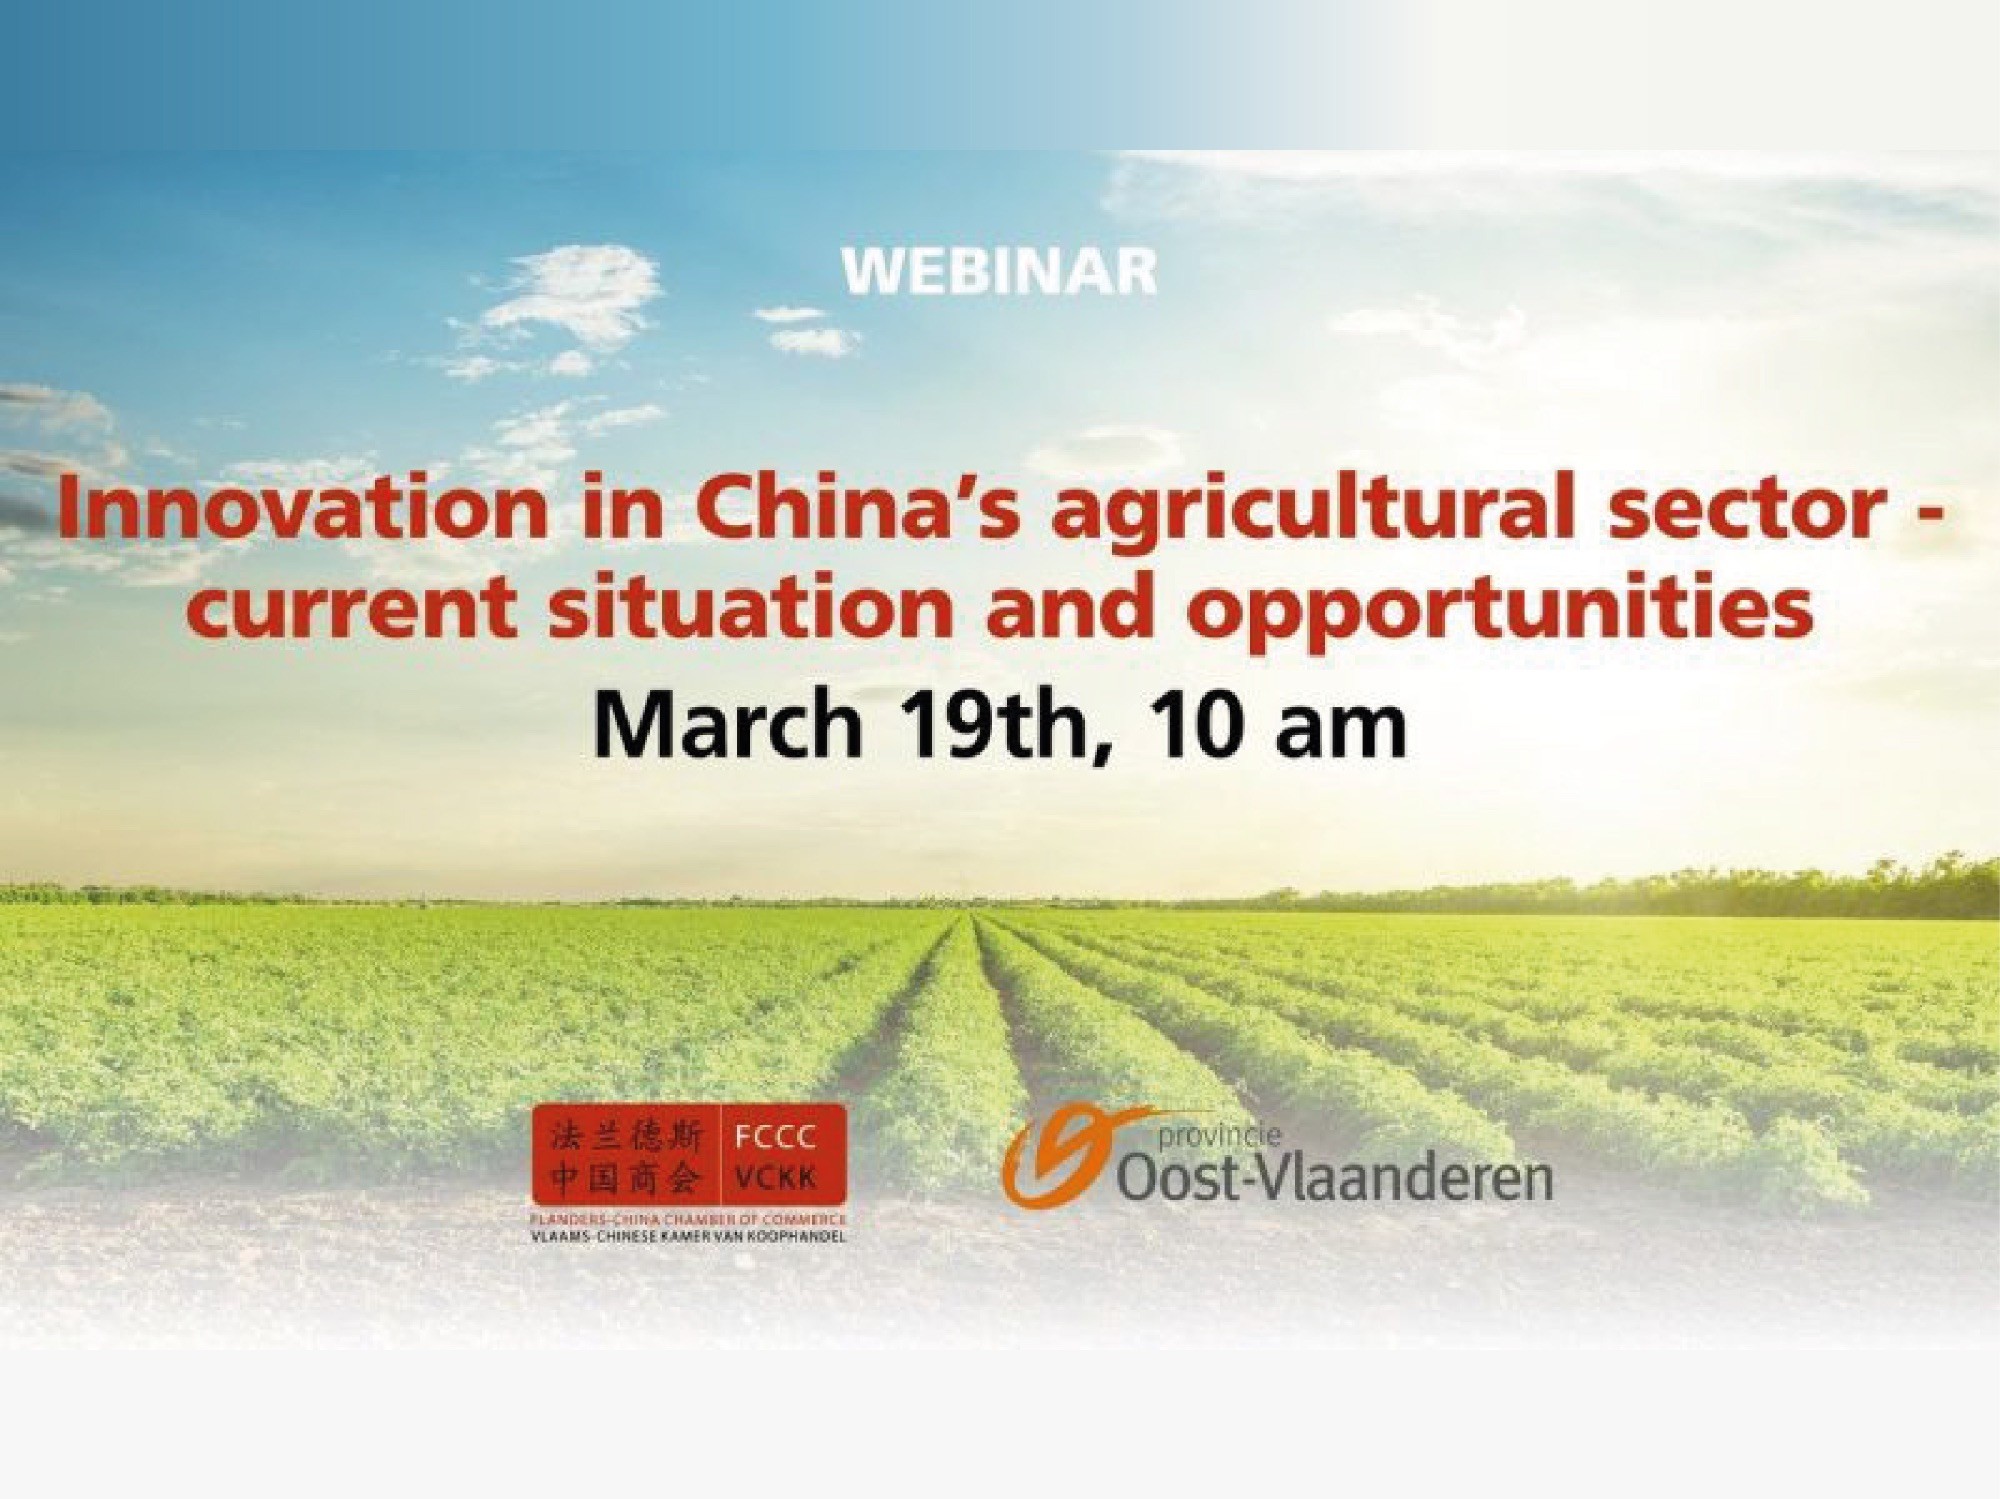 Webinar: Opportunities in China's agricultural sector